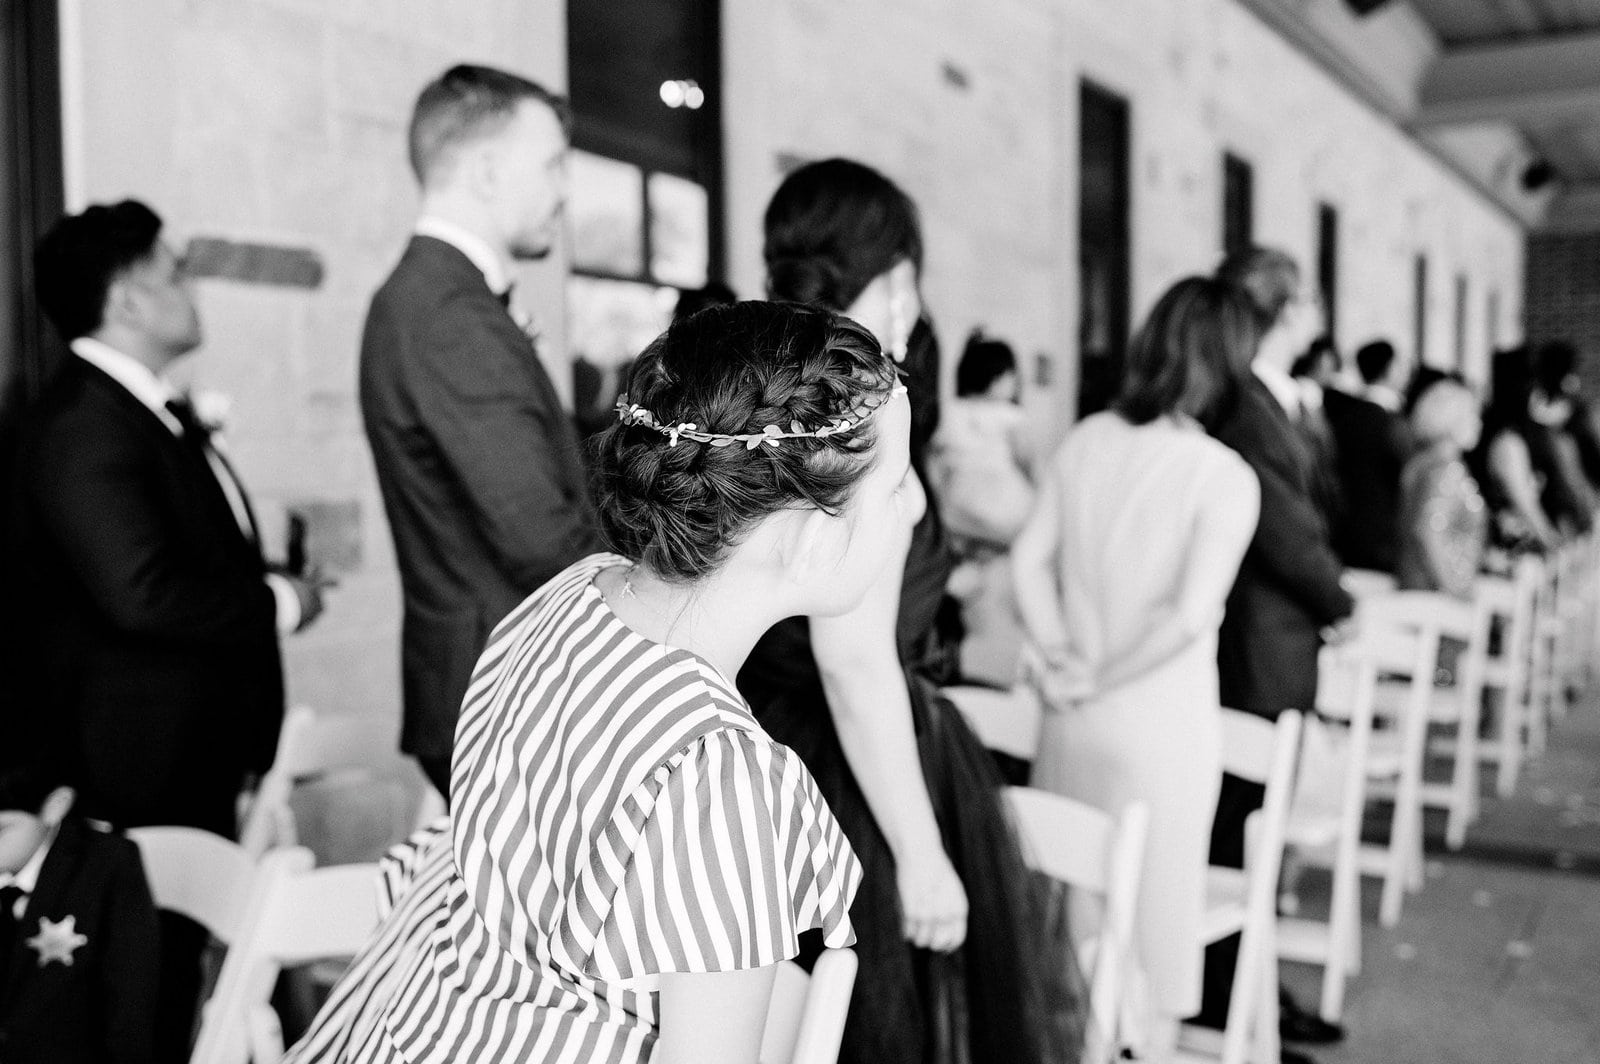 Guests Excited to see Bride at Wedding Ceremony Sunny Toronto at Arlington Estate Wedding Venue, Summer Intimate Elopement Jacqueline James Photography